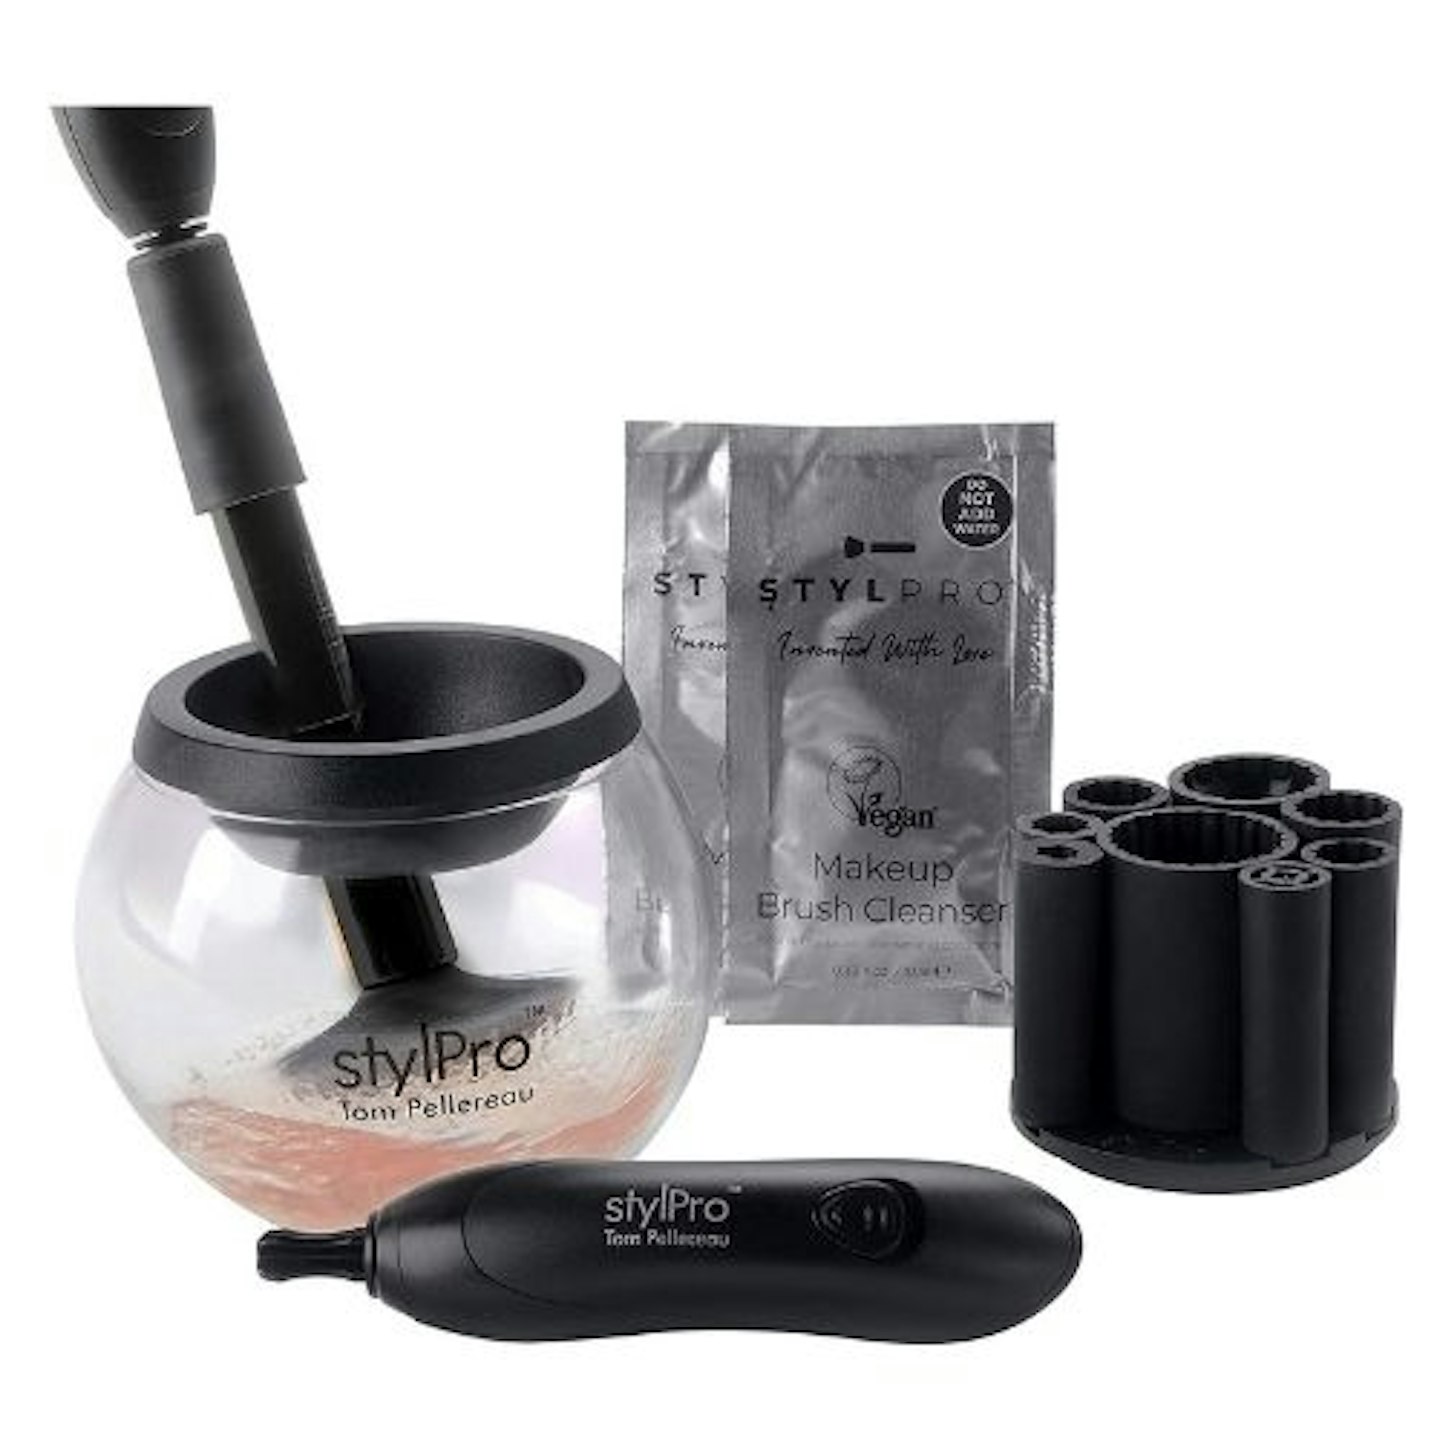 StylPro Electric Makeup Brush Cleaner